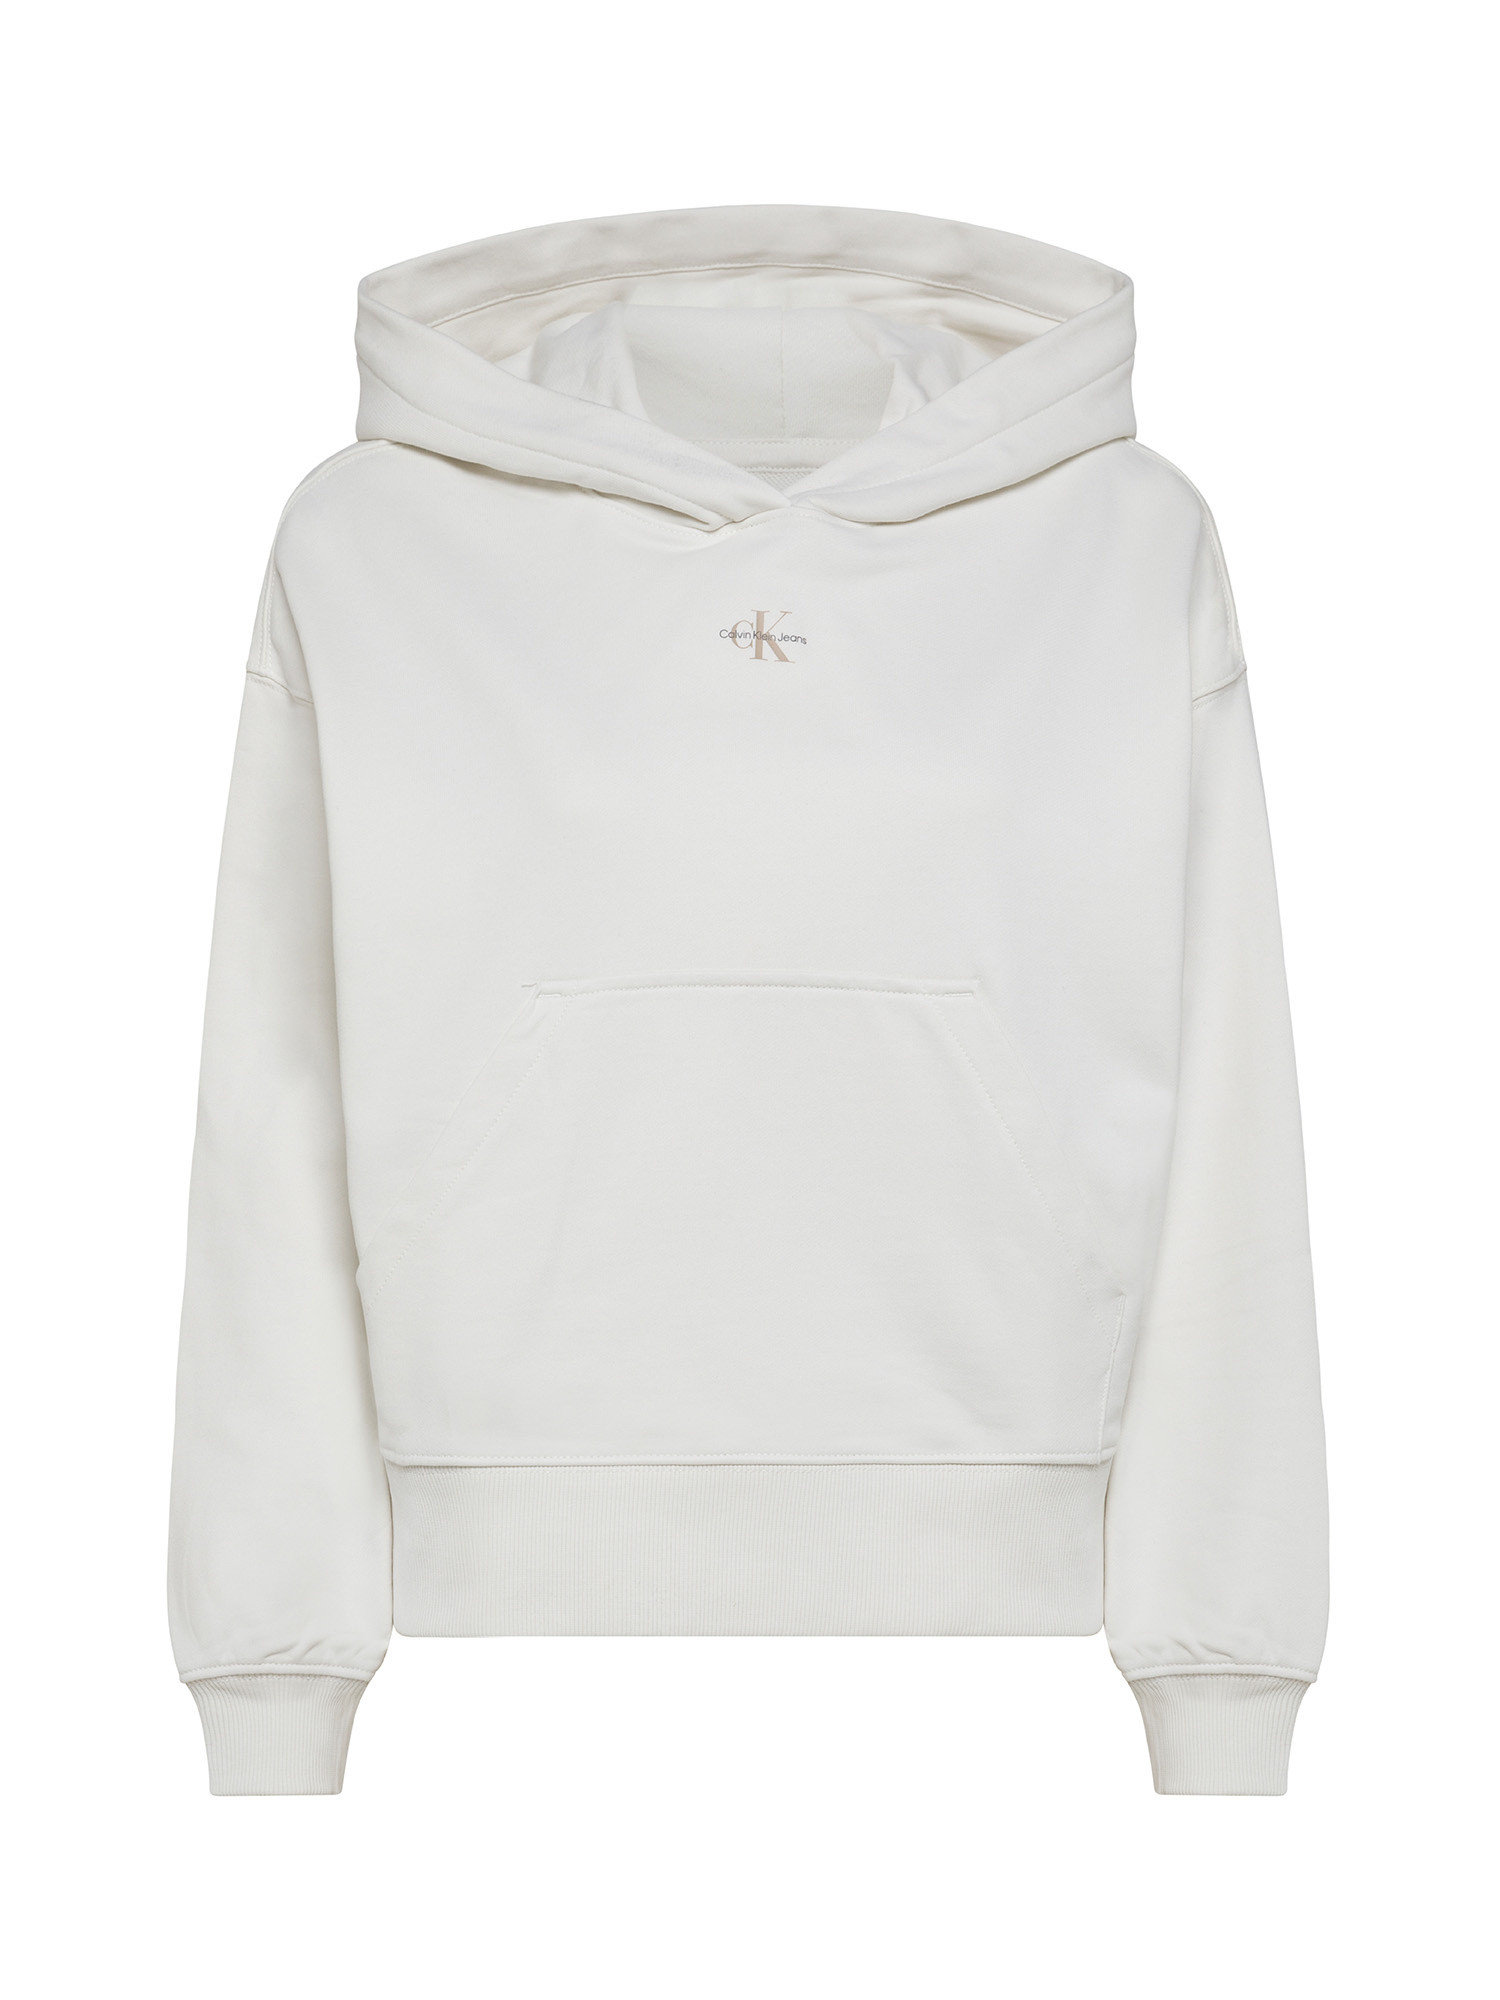 Calvin Klein Jeans - Cotton sweatshirt with logo, White Ivory, large image number 0